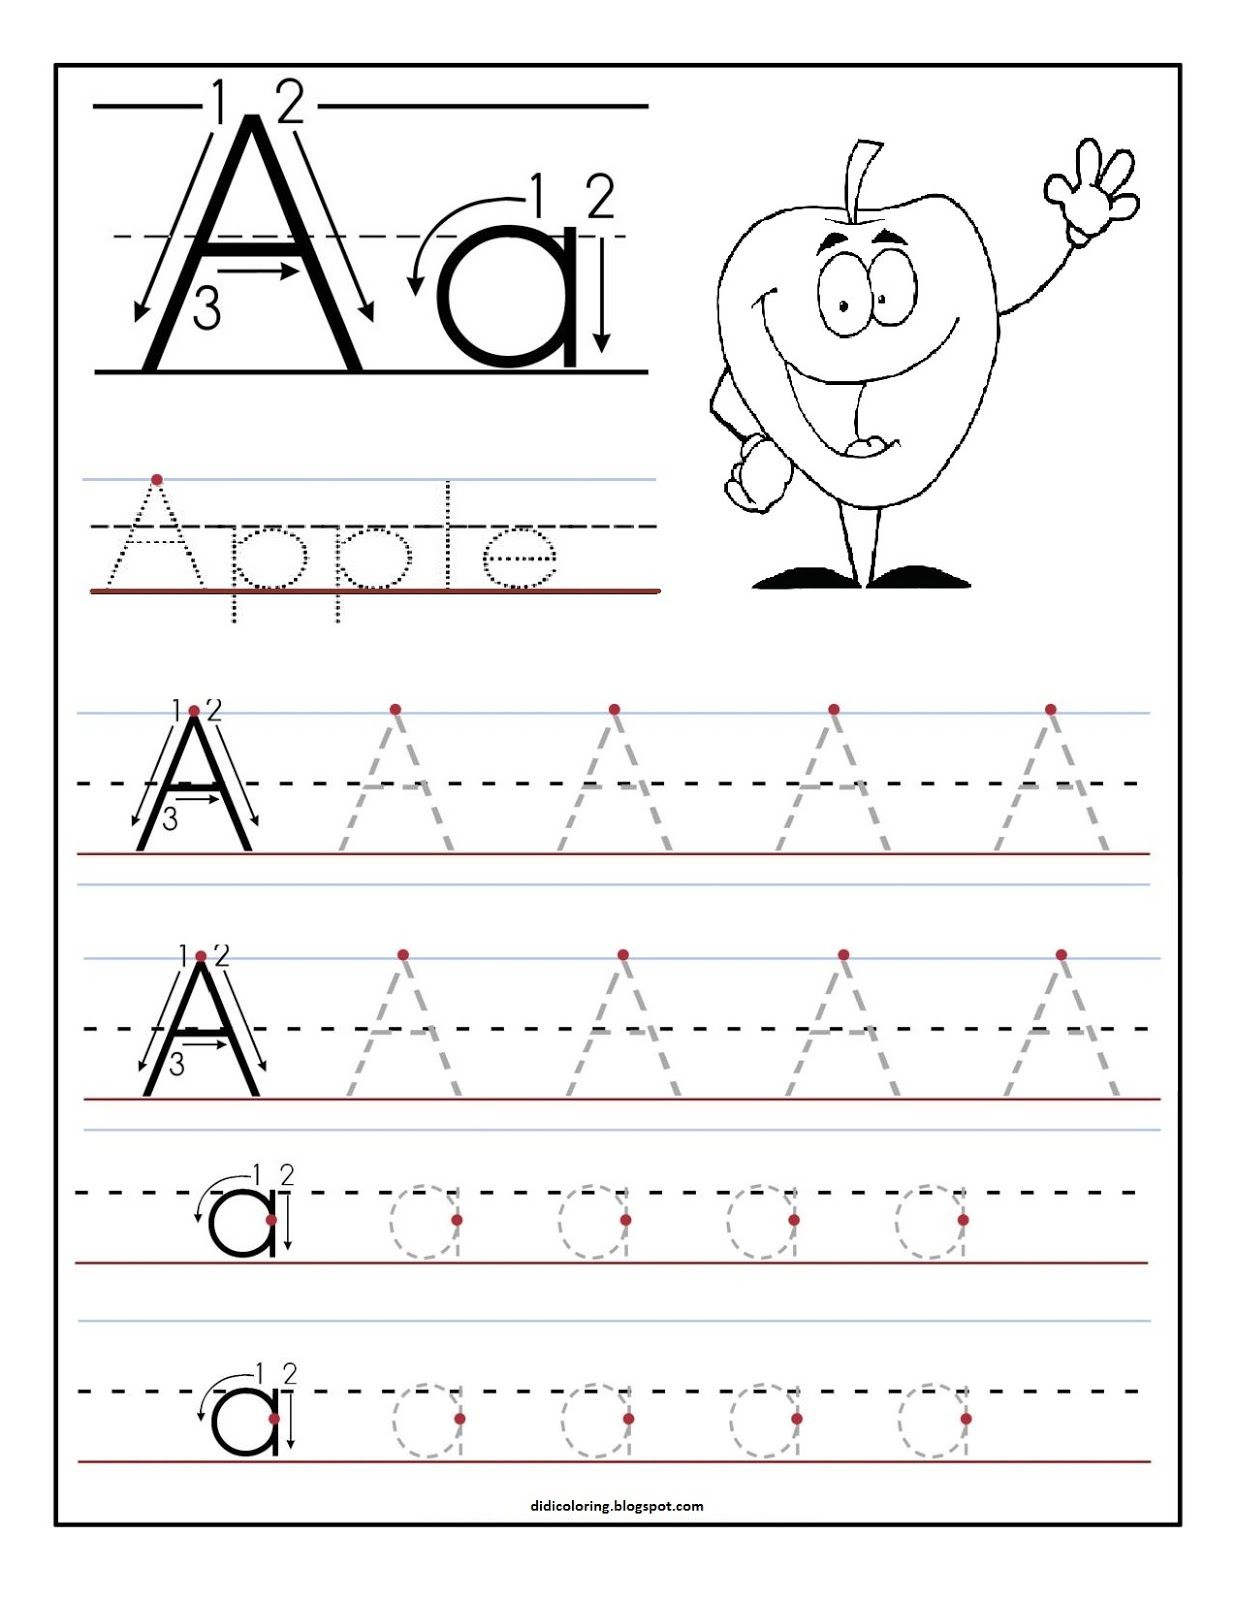 Free Printable Worksheet Letter A For Your Child To Learn And Write - Free Printable Preschool Worksheets For The Letter R